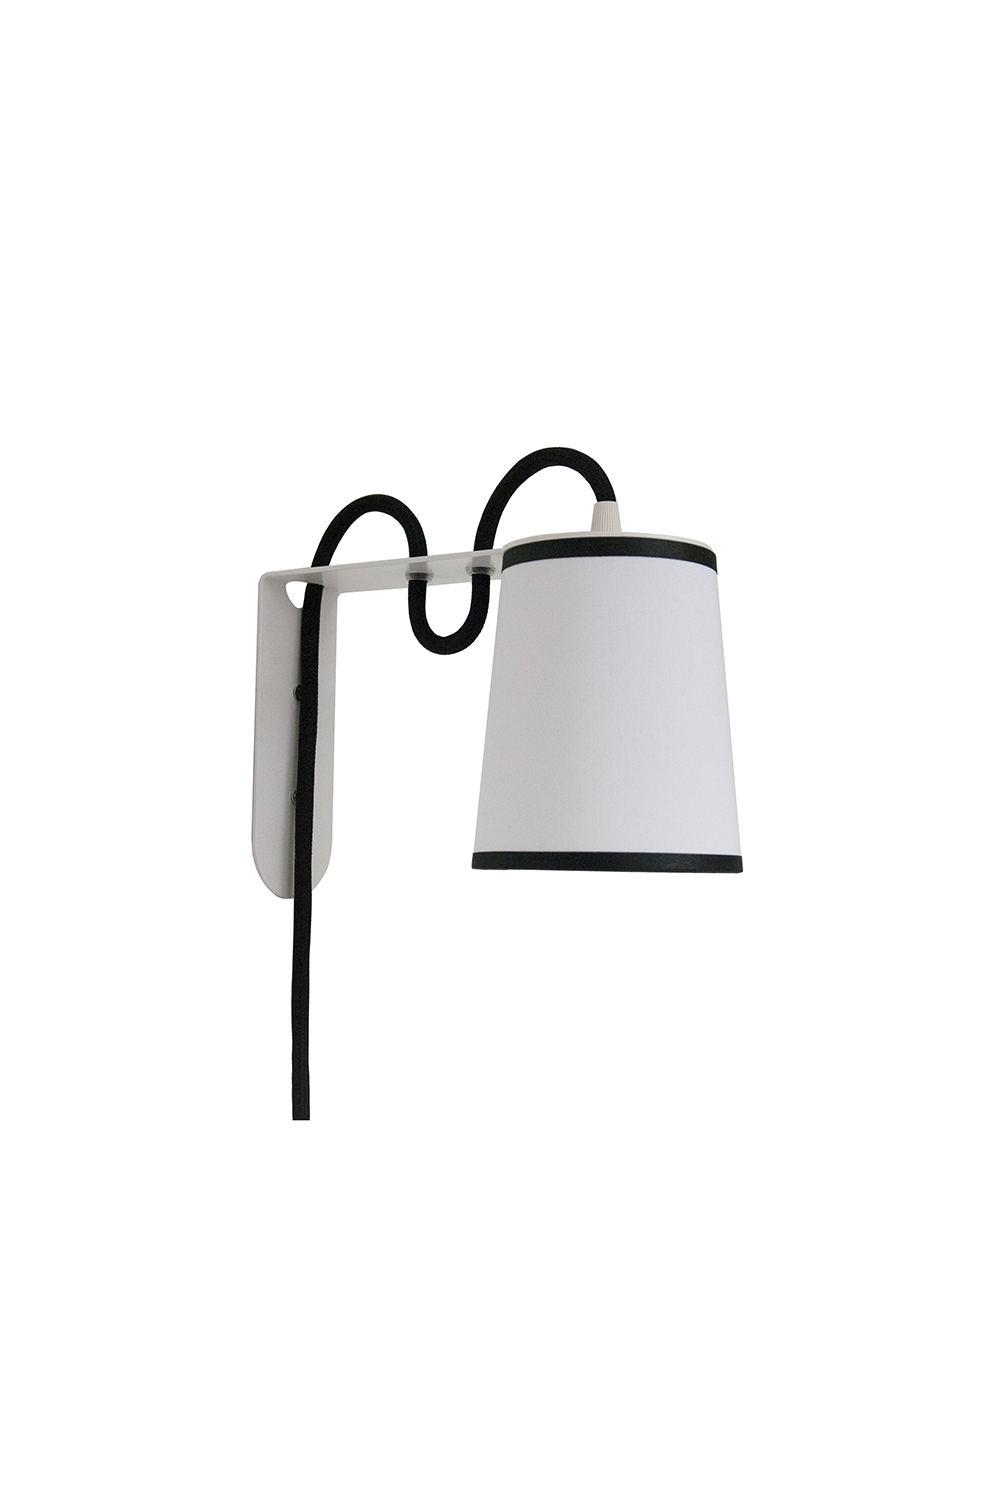 Wall lamp Lightbook - White diffusing with black borders - Designheure